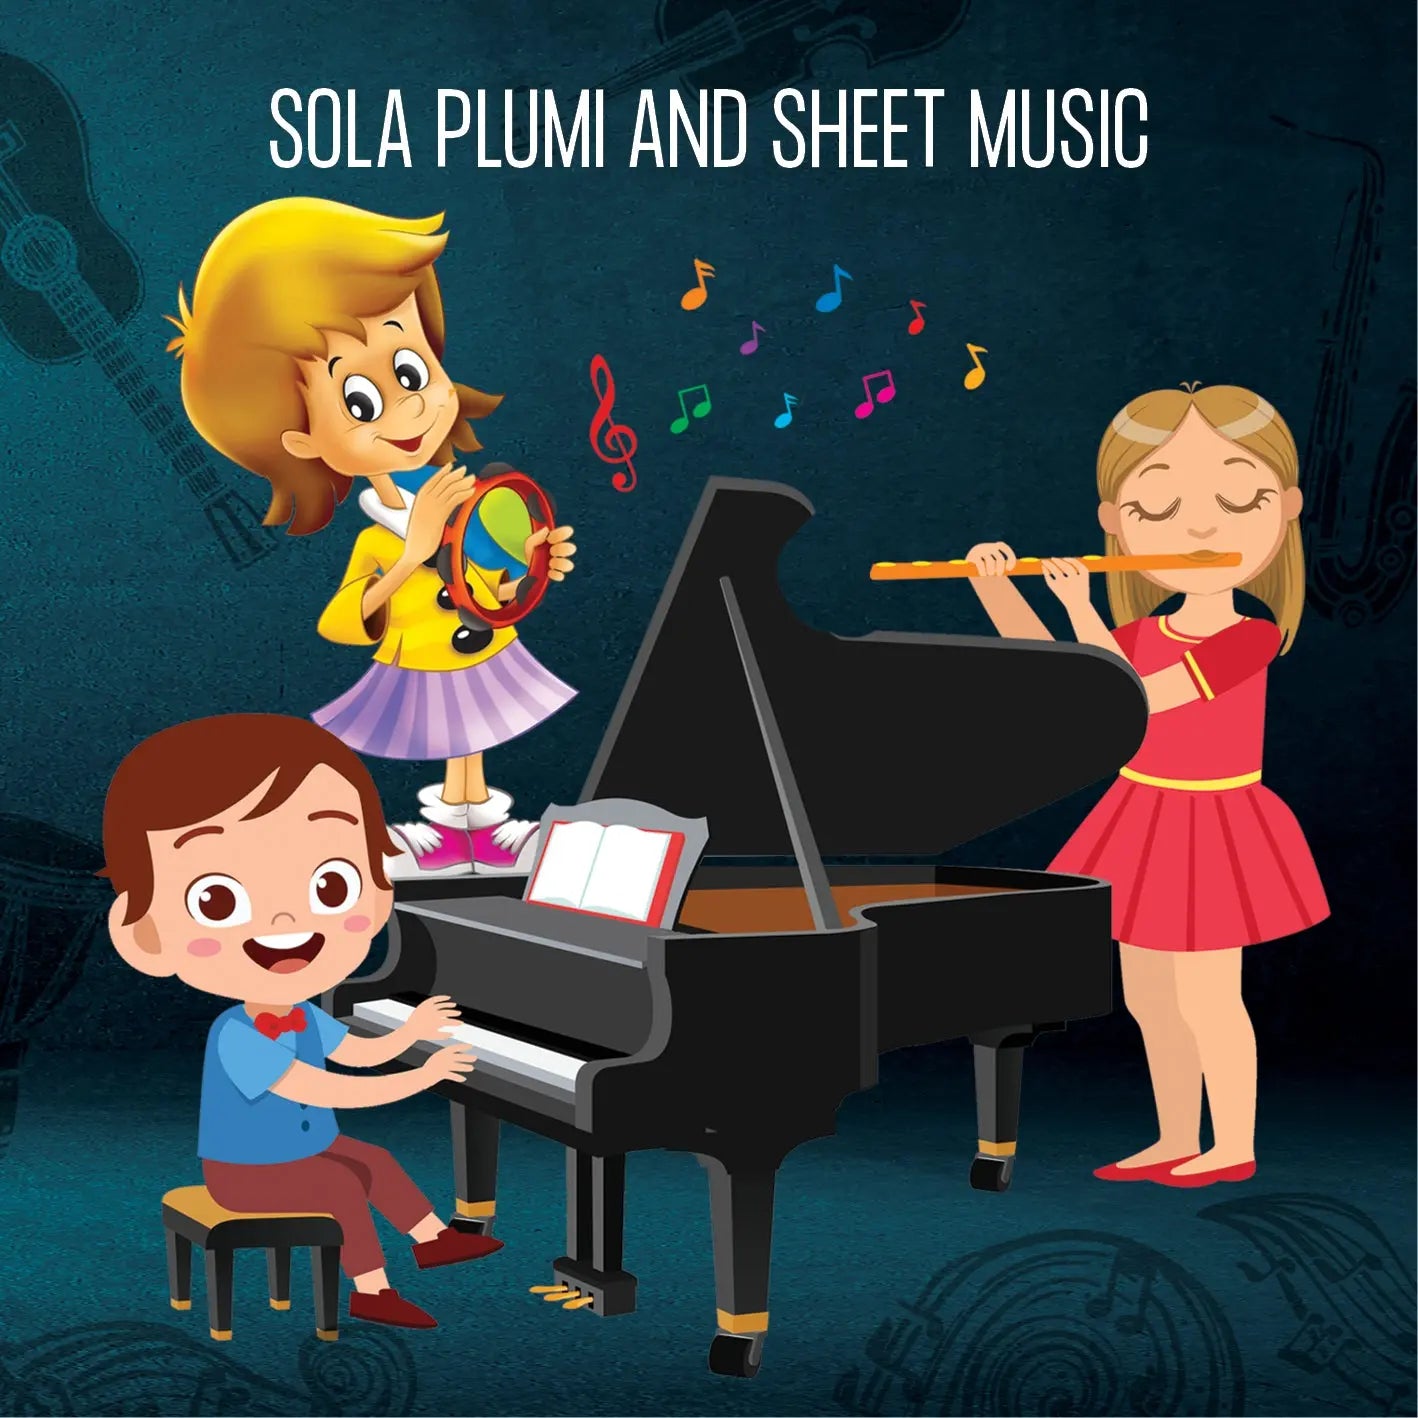 SOLA PLUMI AND SHEET MUSIC FROQUENT